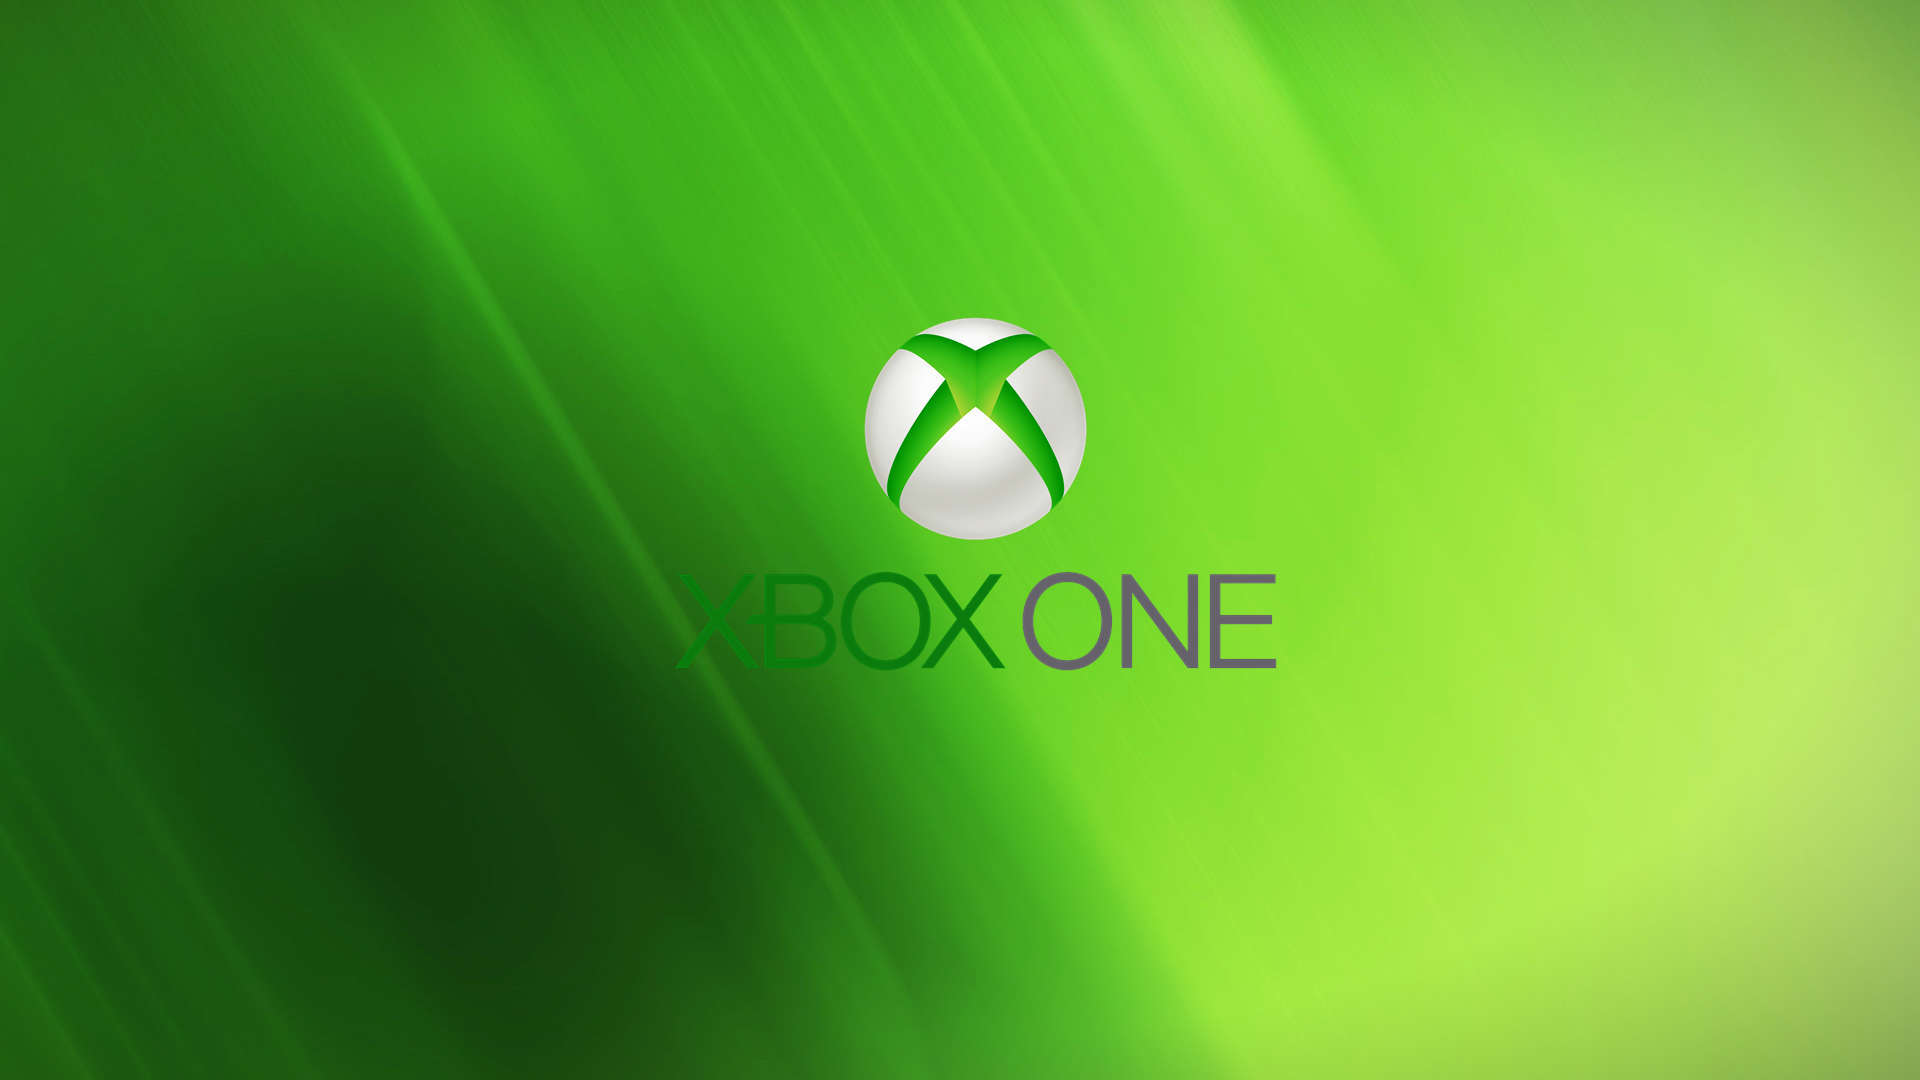 Download now HD Wallpaper Xbox One 1080p Read description infos and